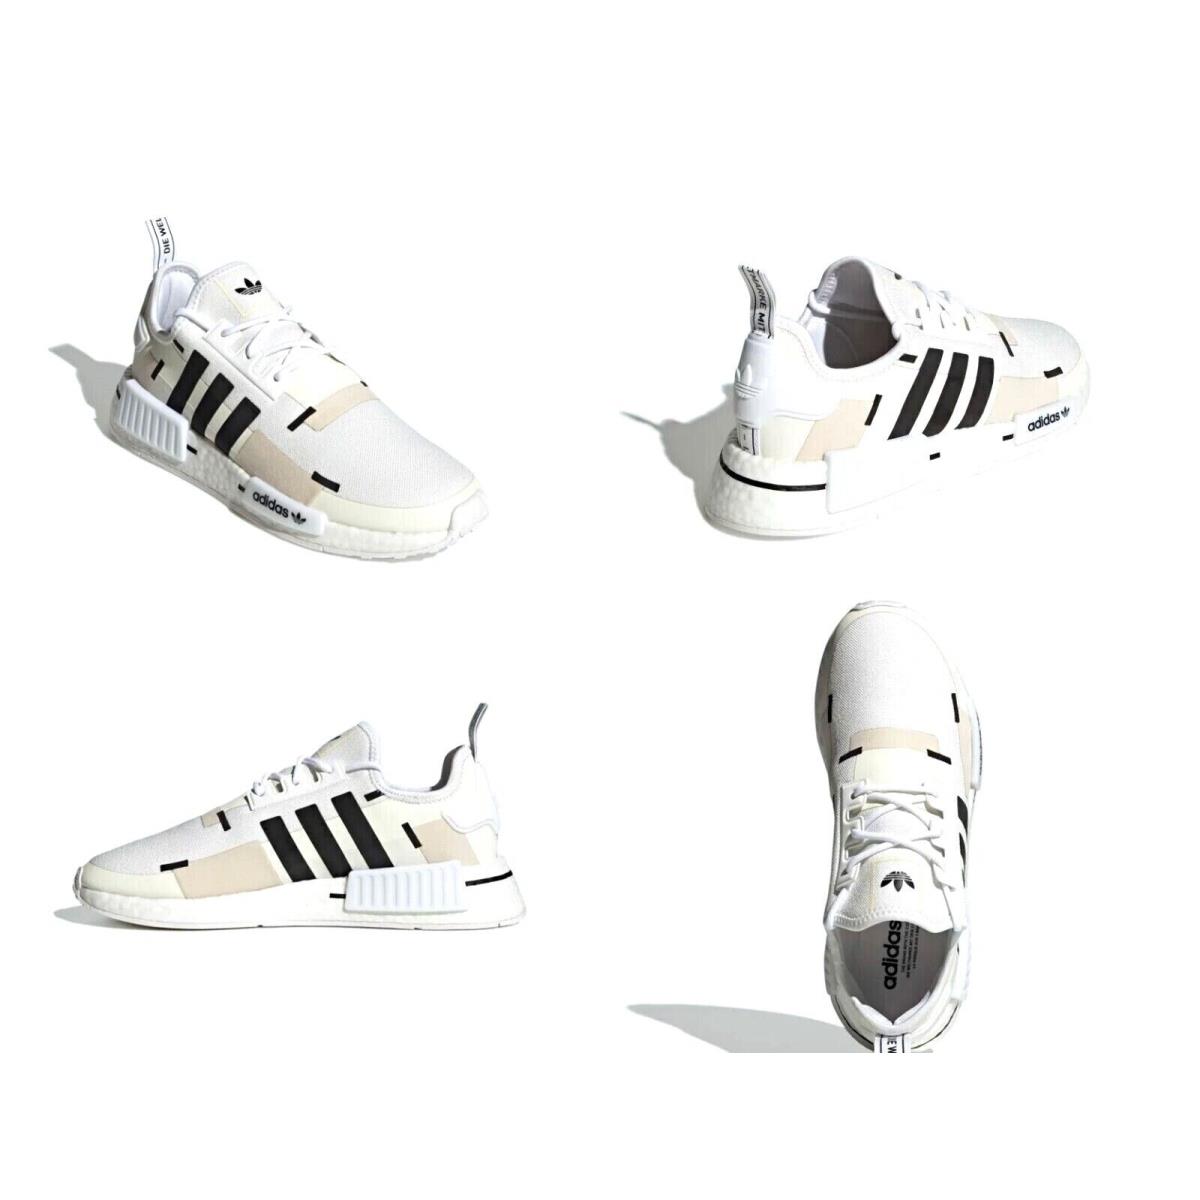 Adidas Nmd R1 Shoes Cloud White / White Mens Size 9.5 - 13 US GZ7947